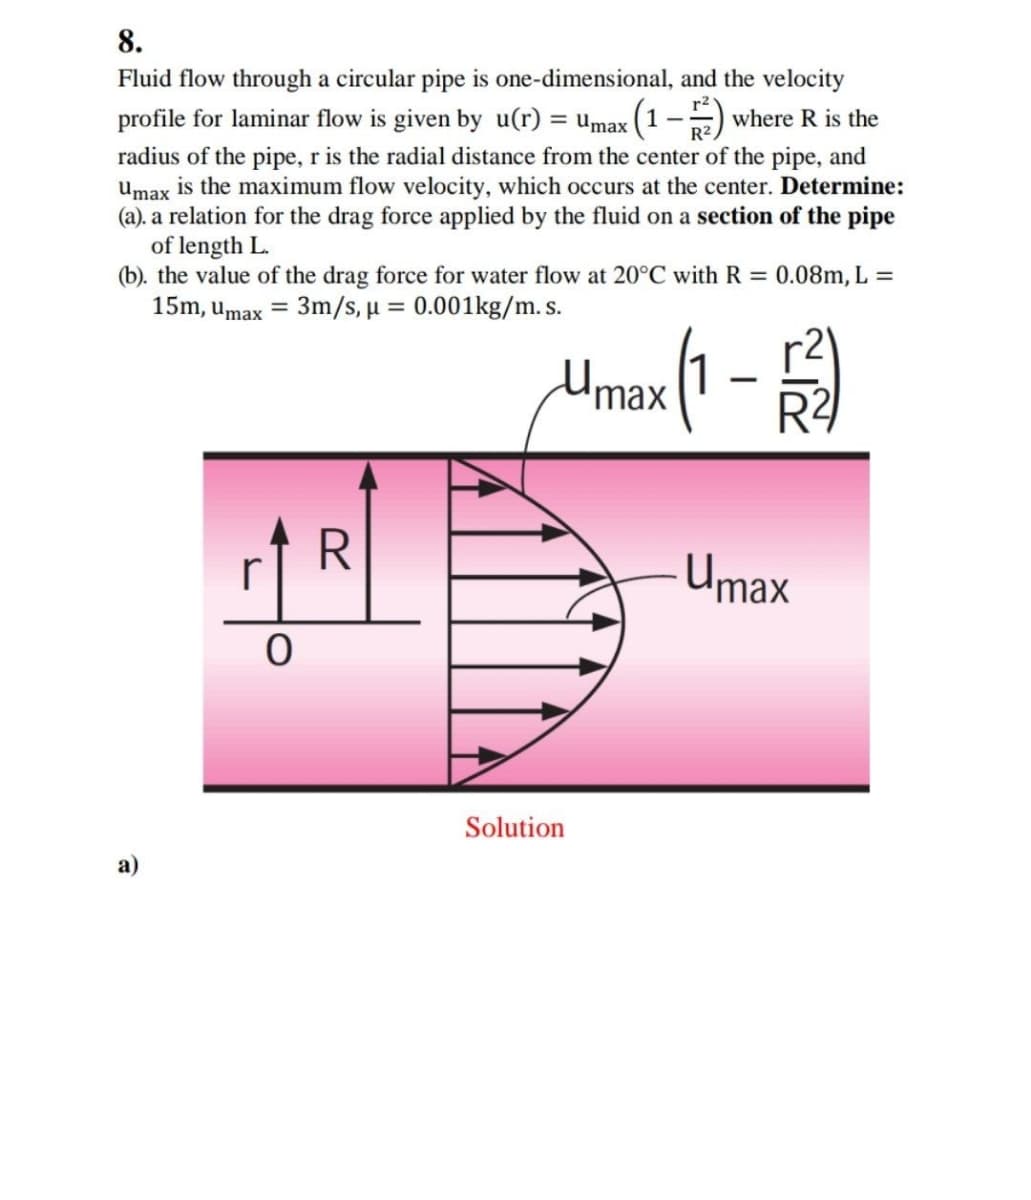 8.
Fluid flow through a circular pipe is one-dimensional, and the velocity
profile for laminar flow is given by u(r) = Umax (1 –) where R is the
radius of the pipe, r is the radial distance from the center of the pipe, and
umax is the maximum flow velocity, which occurs at the center. Determine:
(a). a relation for the drag force applied by the fluid on a section of the pipe
of length L.
(b). the value of the drag force for water flow at 20°C with R = 0.08m, L
15m, umax = 3m/s, u = 0.001kg/m. s.
%3D
%3D
1
R2
-
'max
Umax
Solution
а)
